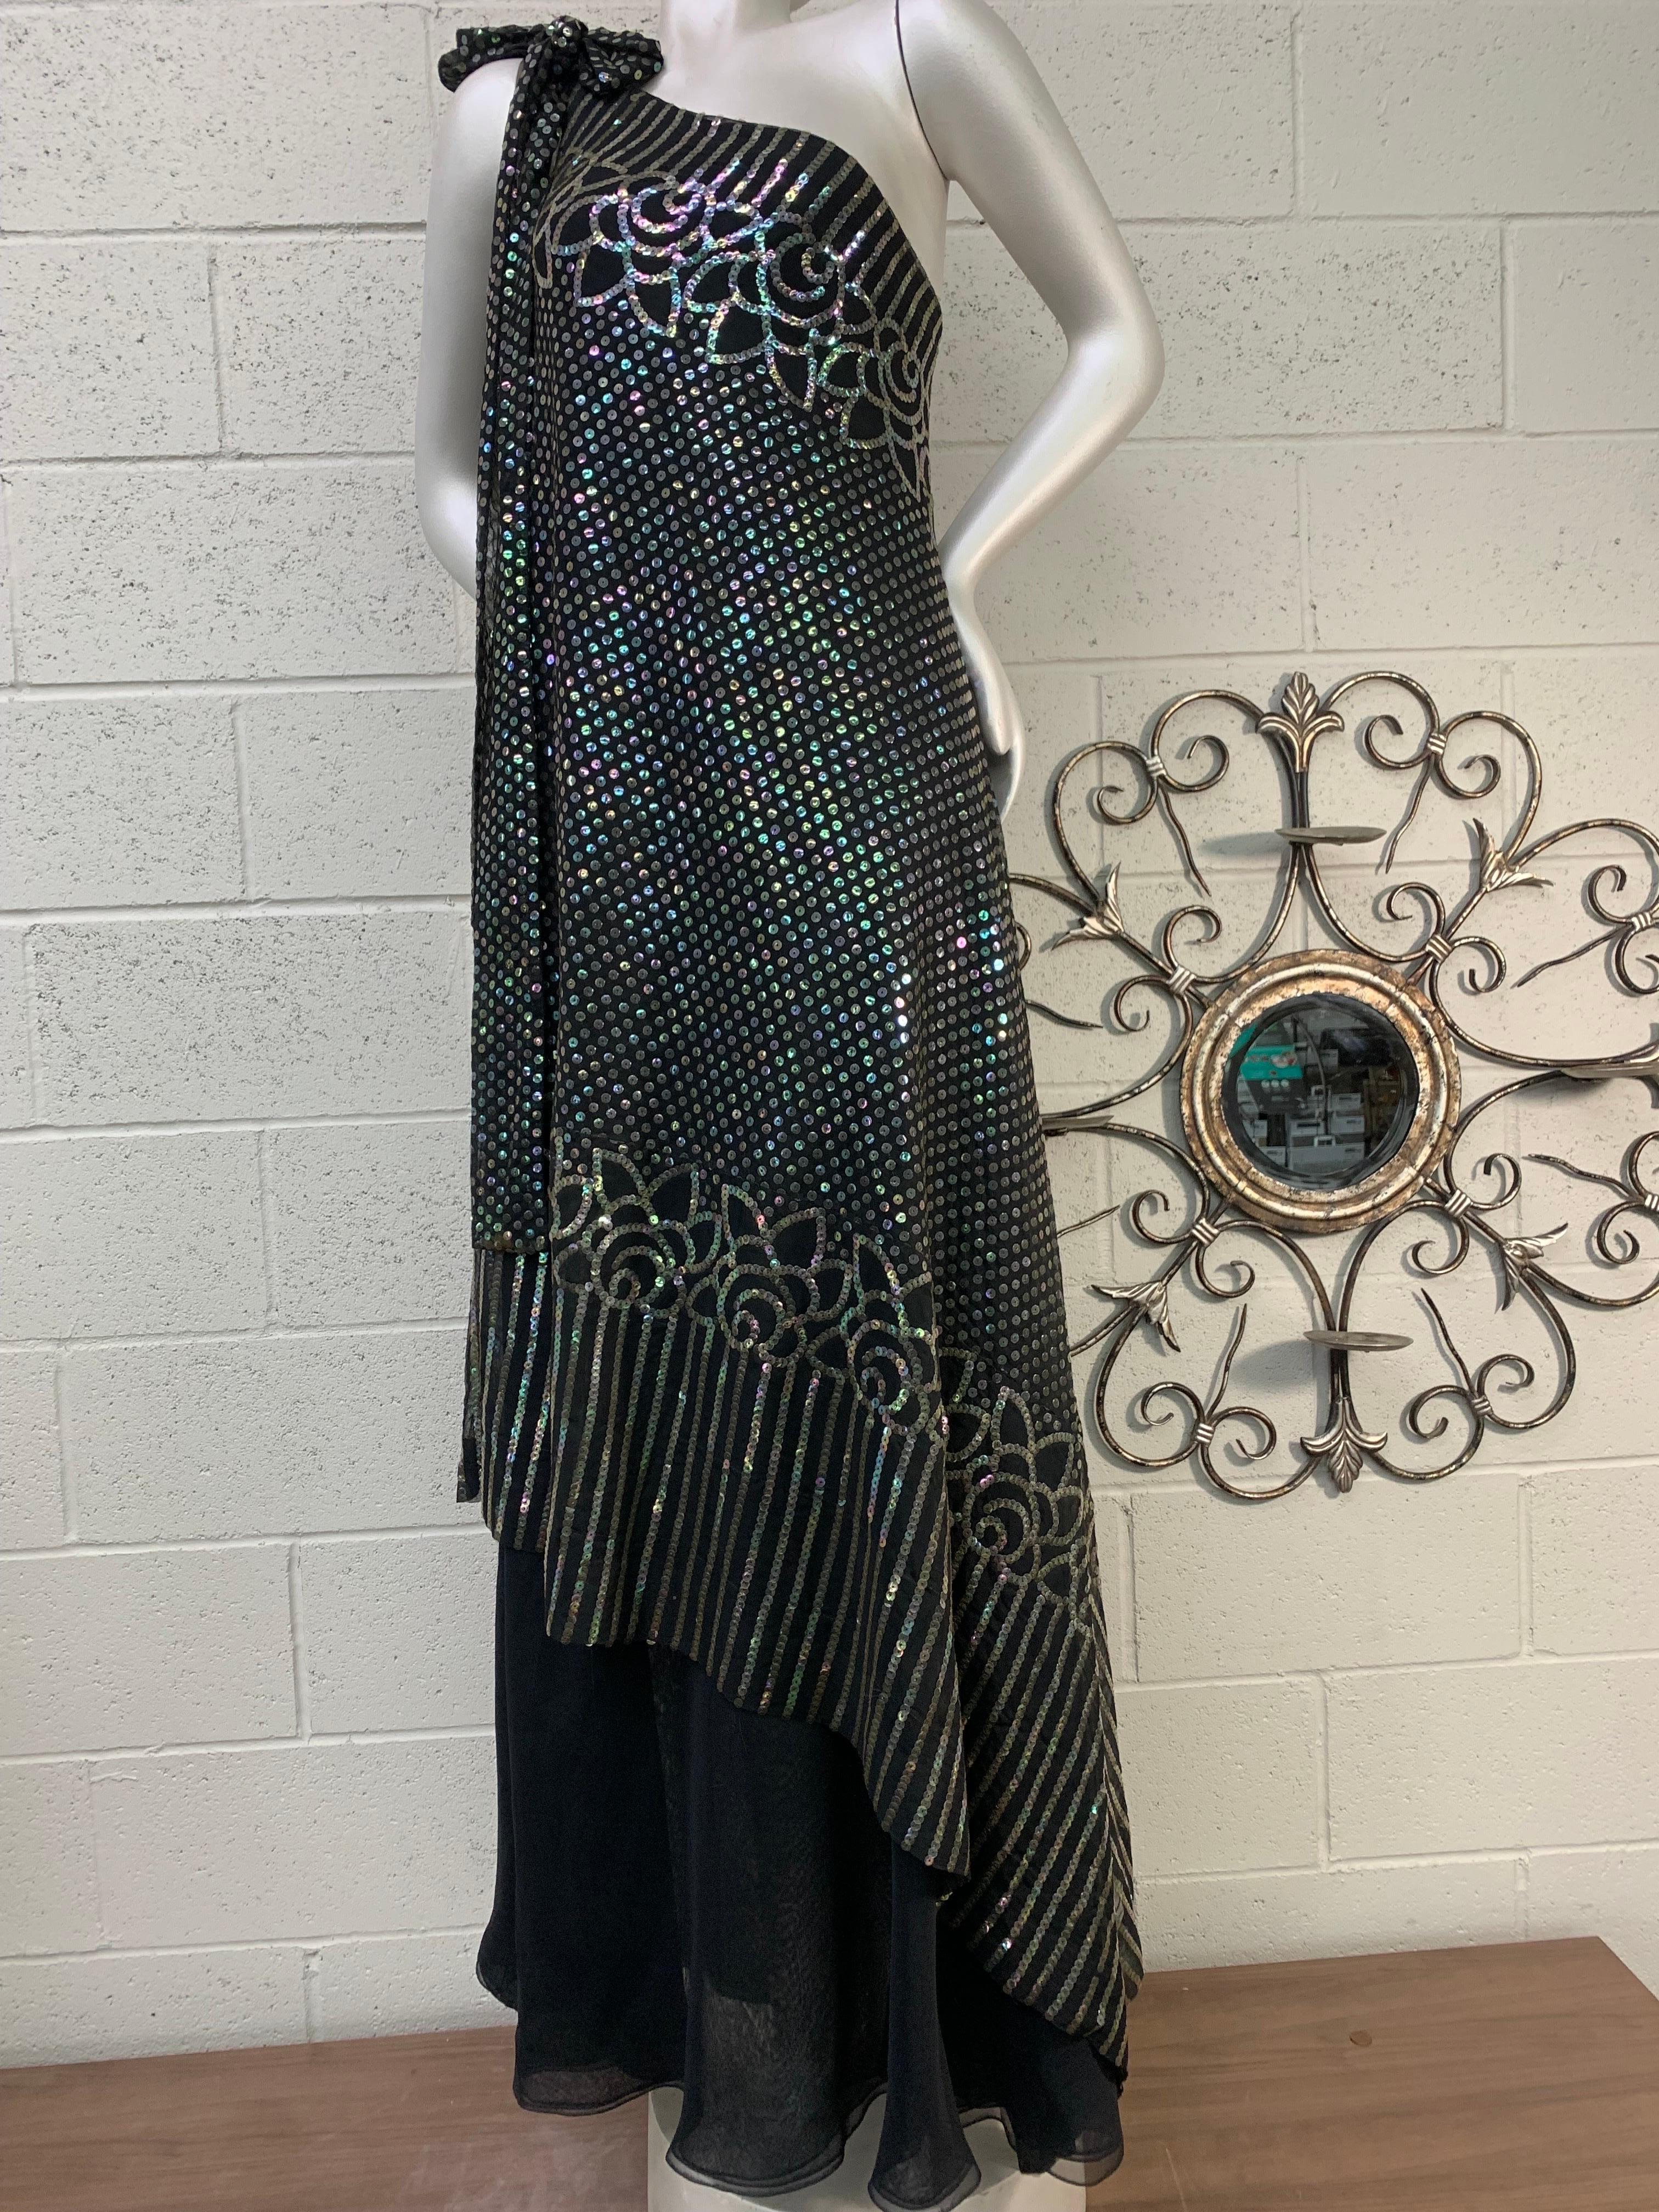 1970 Ruben Panis Black Chiffon Hologram Sequin Art Deco Styled One-Shoulder Gown In Excellent Condition For Sale In Gresham, OR